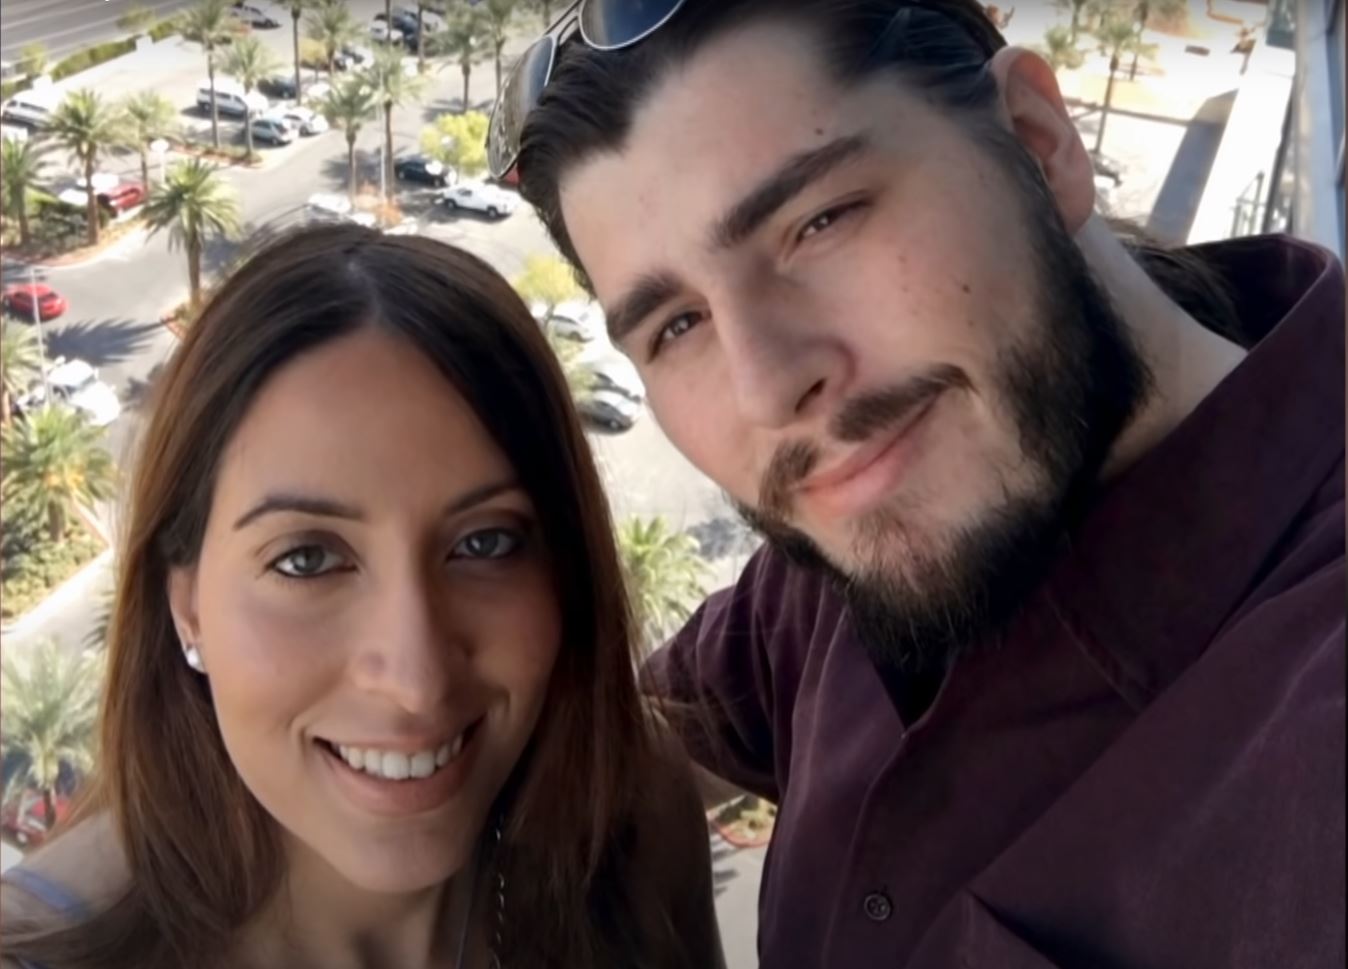 Andrew Kenton poses with Amira from 90 Day Fiancé